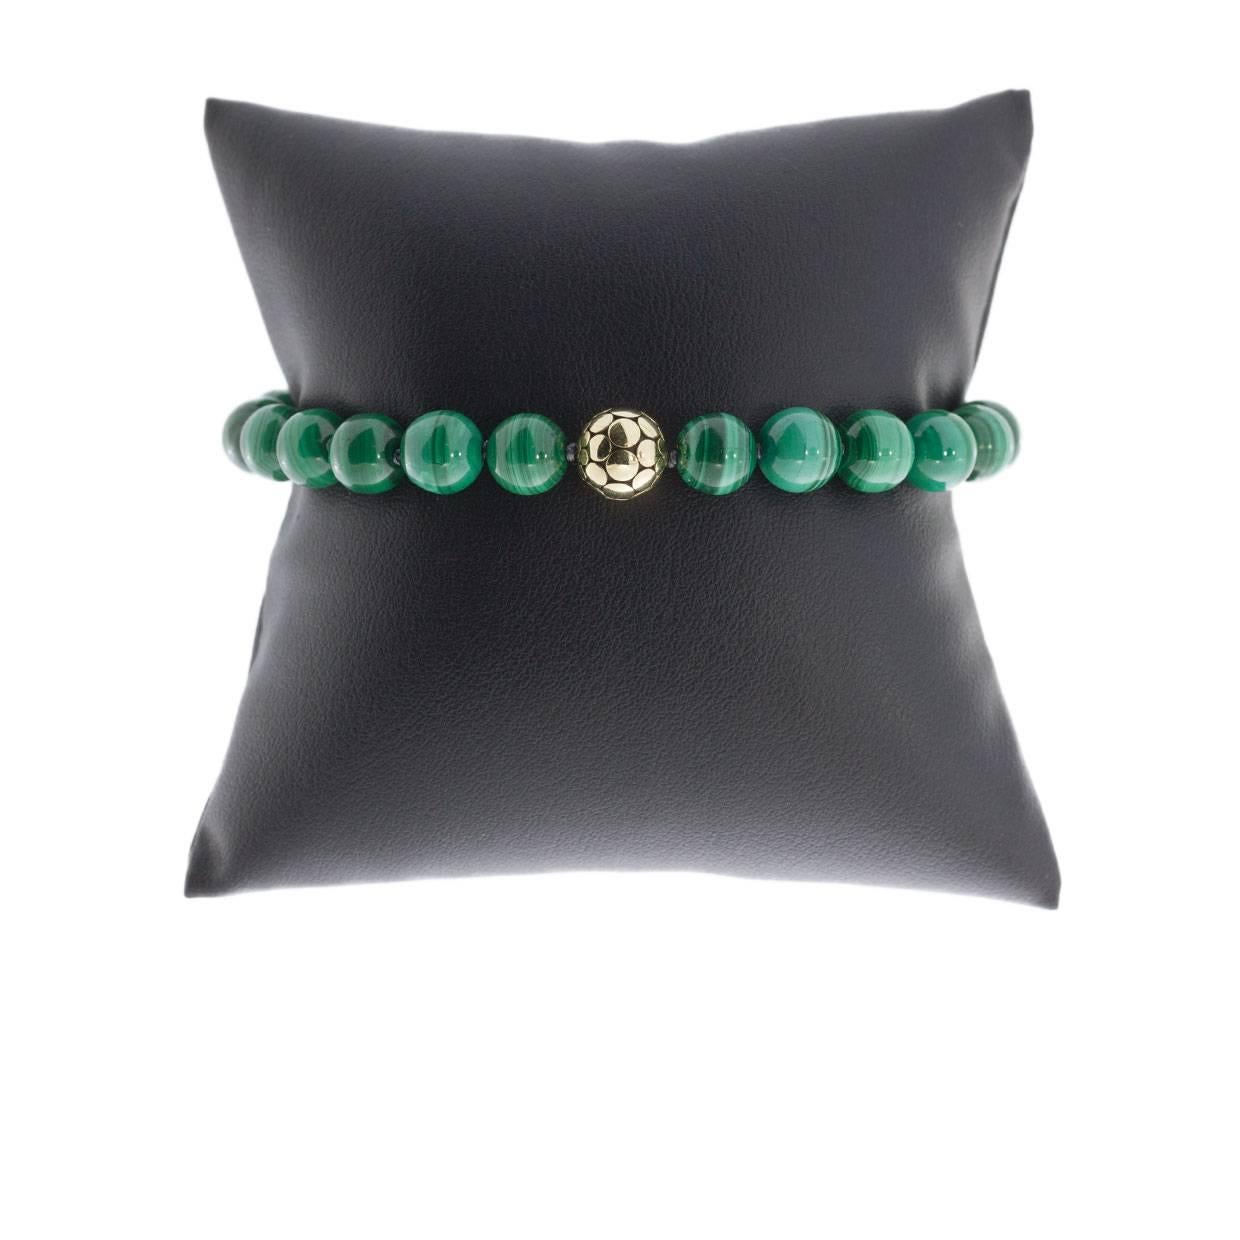 Each piece of John Hardy jewelry has been crafted in Bali since 1975. John Hardy is dedicated to creating timeless one-of-a-kind pieces that are brilliantly alive.

This sterling silver and 18K yellow gold malachite bead cord bracelet is from John